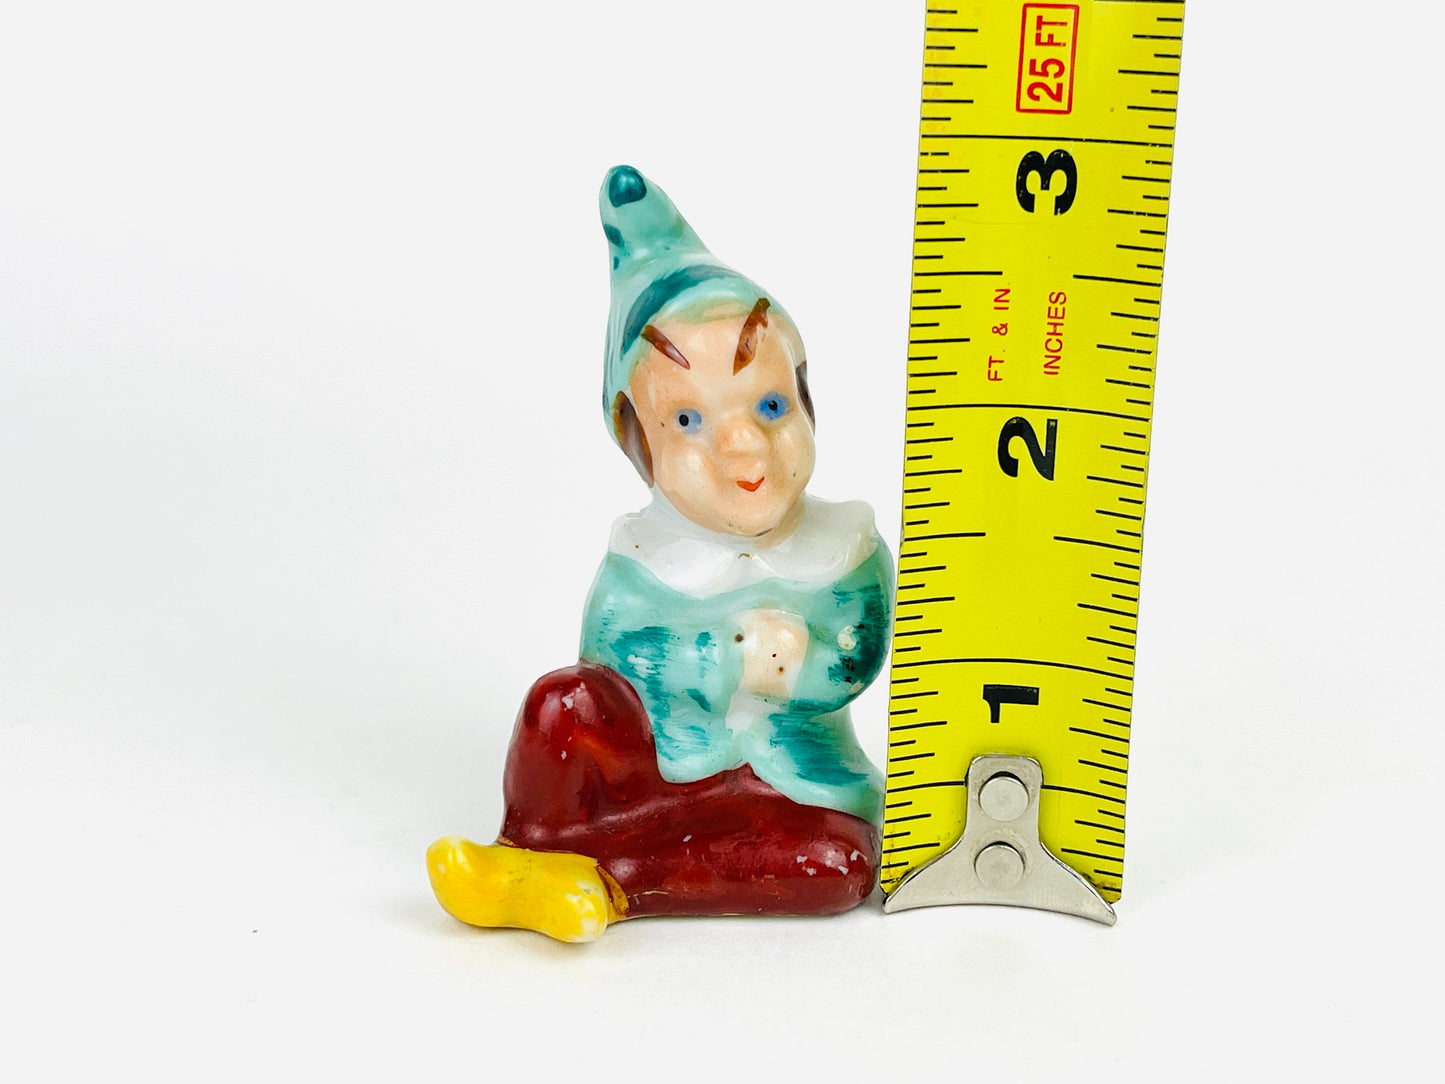 Vintage fairy pixie figurine miniature hand painted ceramic gnome imp collectable figurines Made in Japan